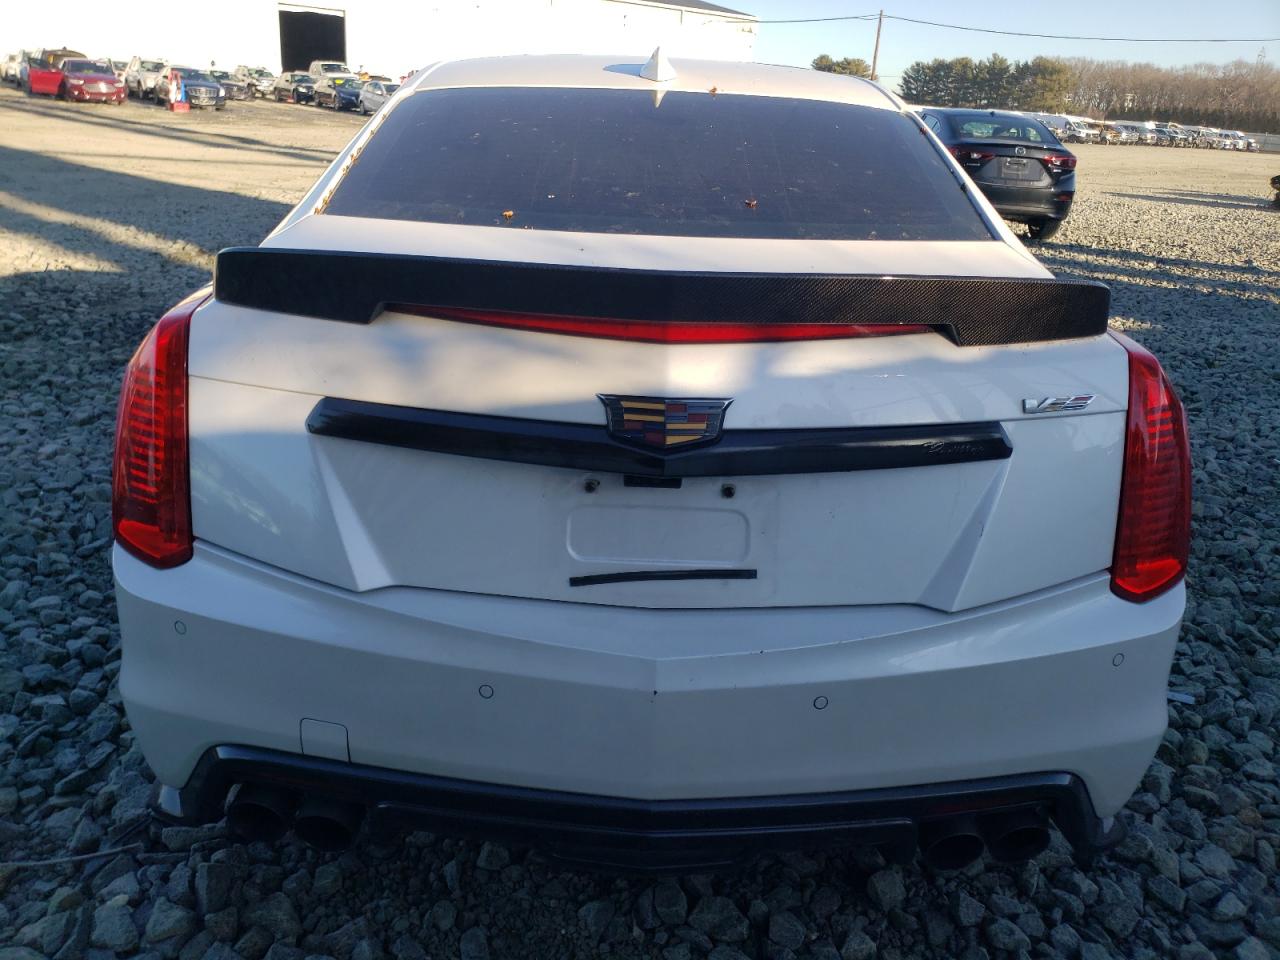 VIN: 1G6A15S6XK0108311 CADILLAC CTS 2019